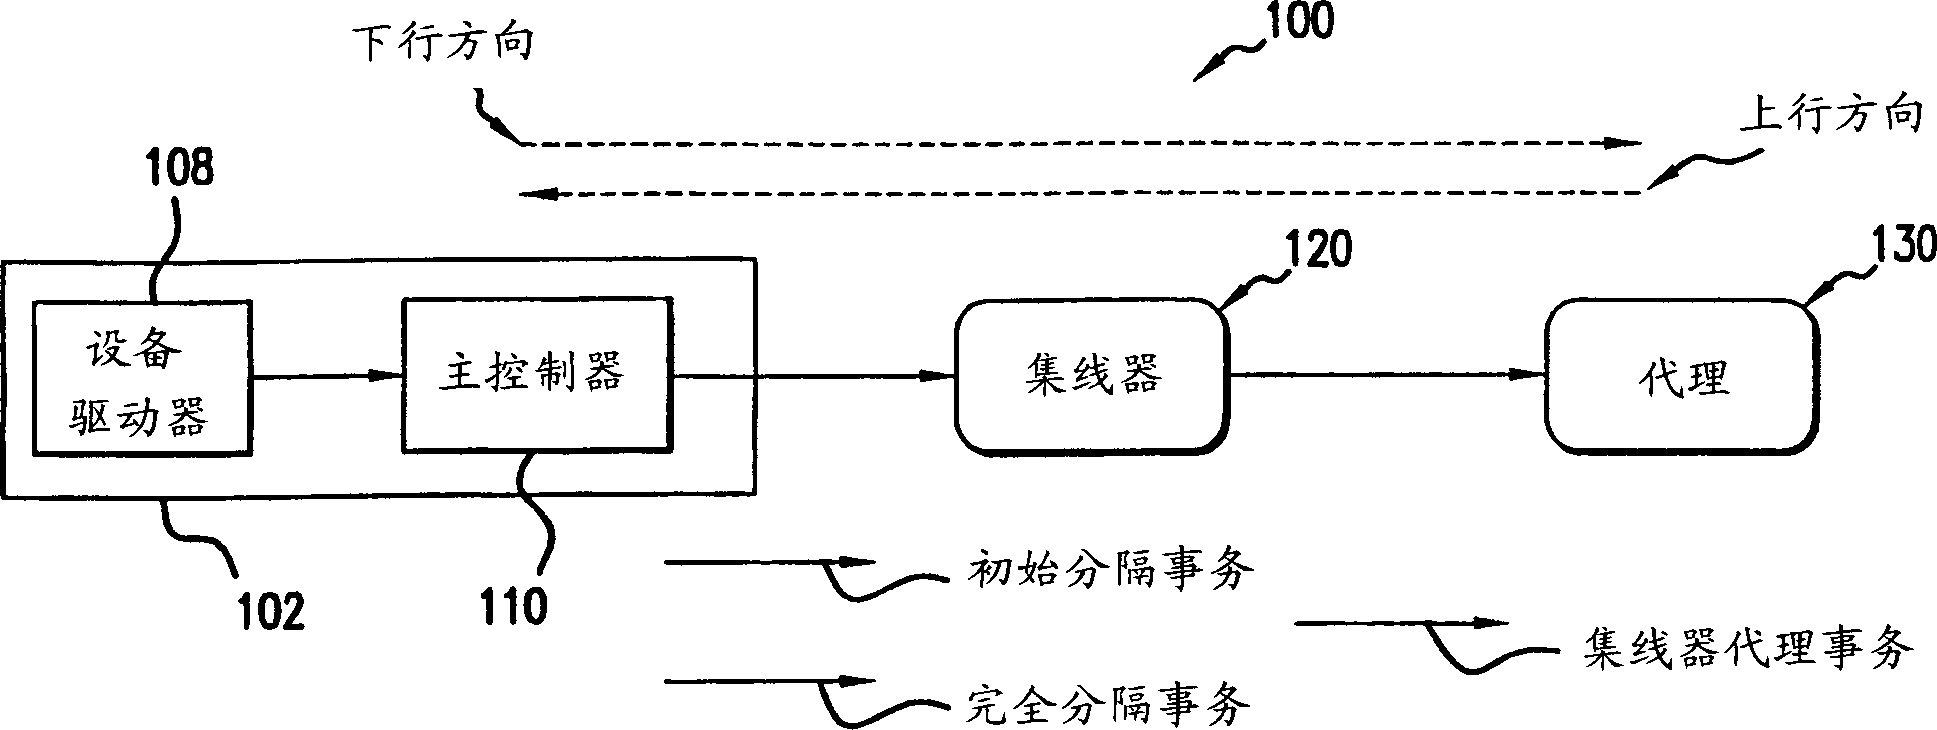 Transaction scheduling for a bus system